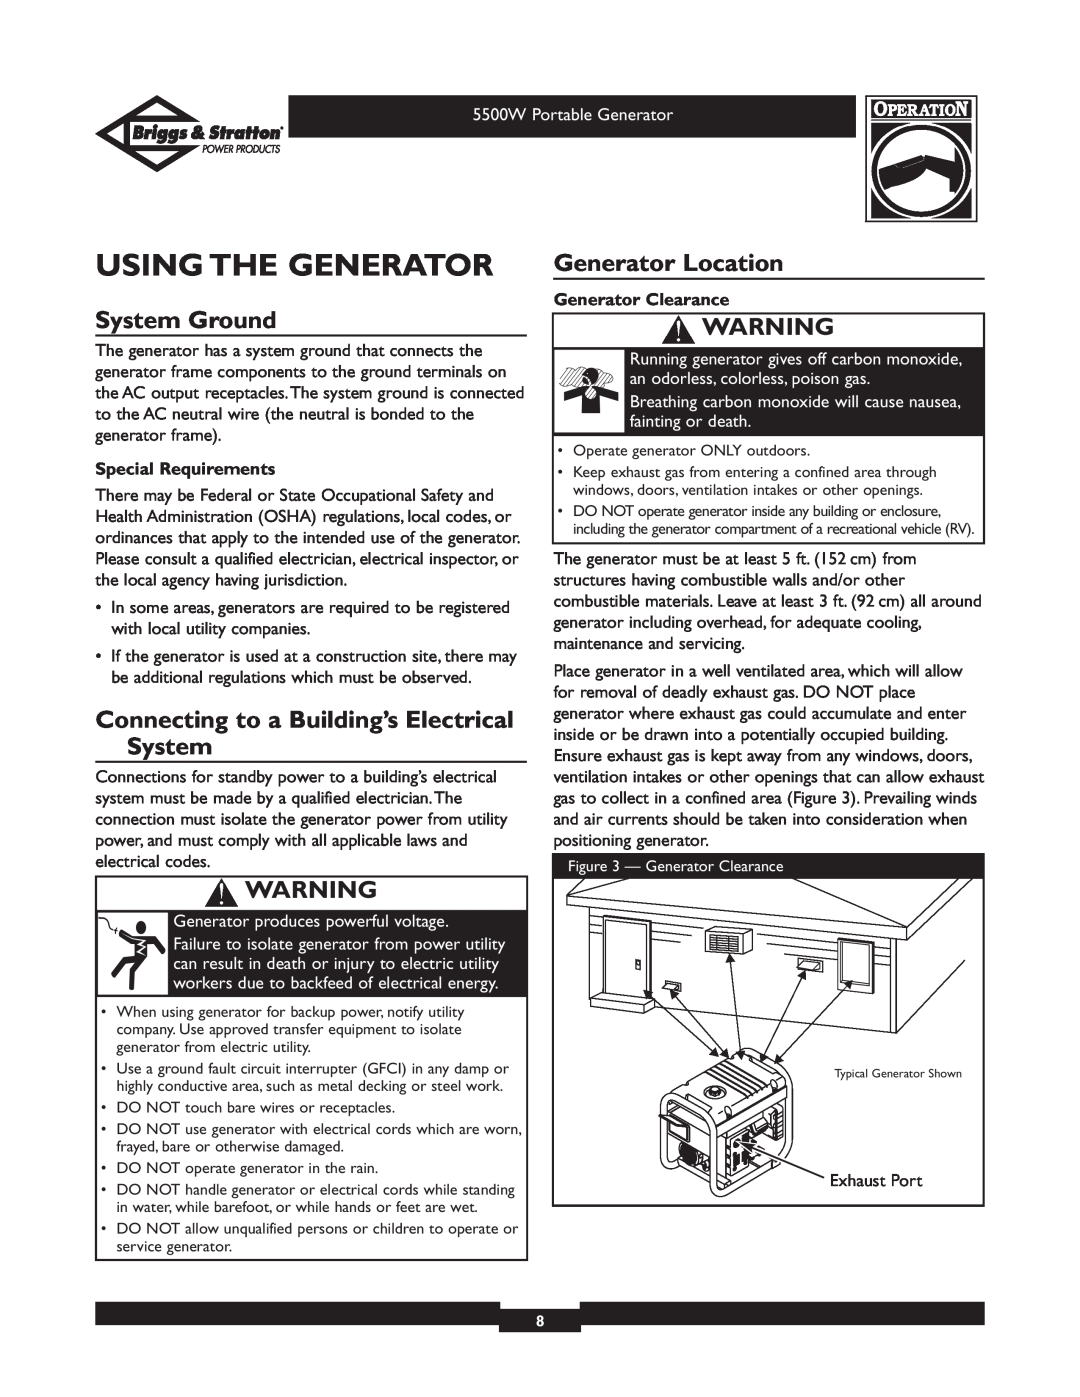 Briggs & Stratton 030209 owner manual Using The Generator, System Ground, Connecting to a Building’s Electrical System 